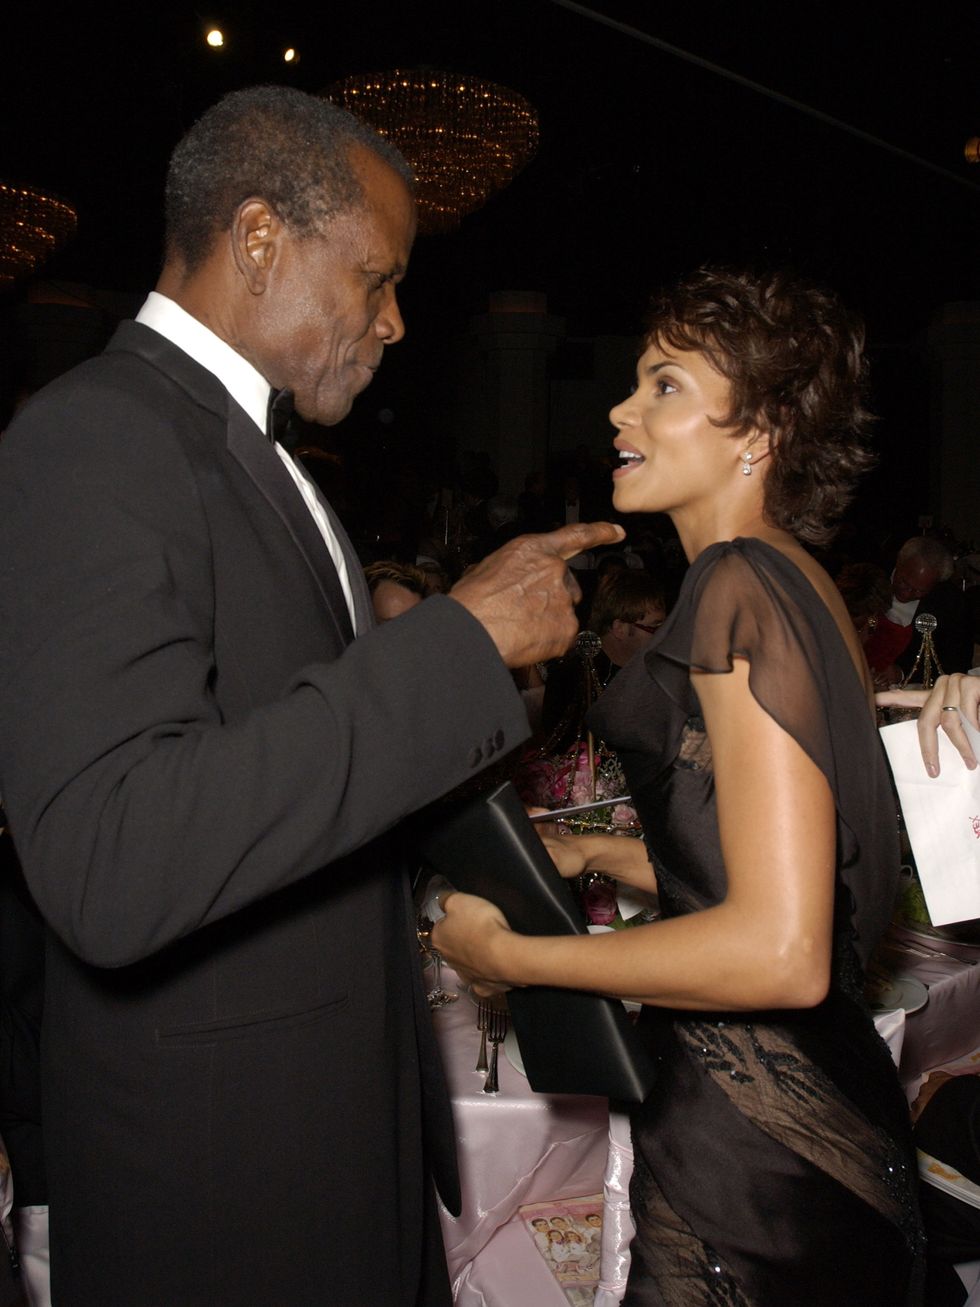 sidney poitier and halle berry during the 15th carousel of hope ball   show and audience at beverly hilton hotel in beverly hills, california, united states photo by m caulfieldwireimage